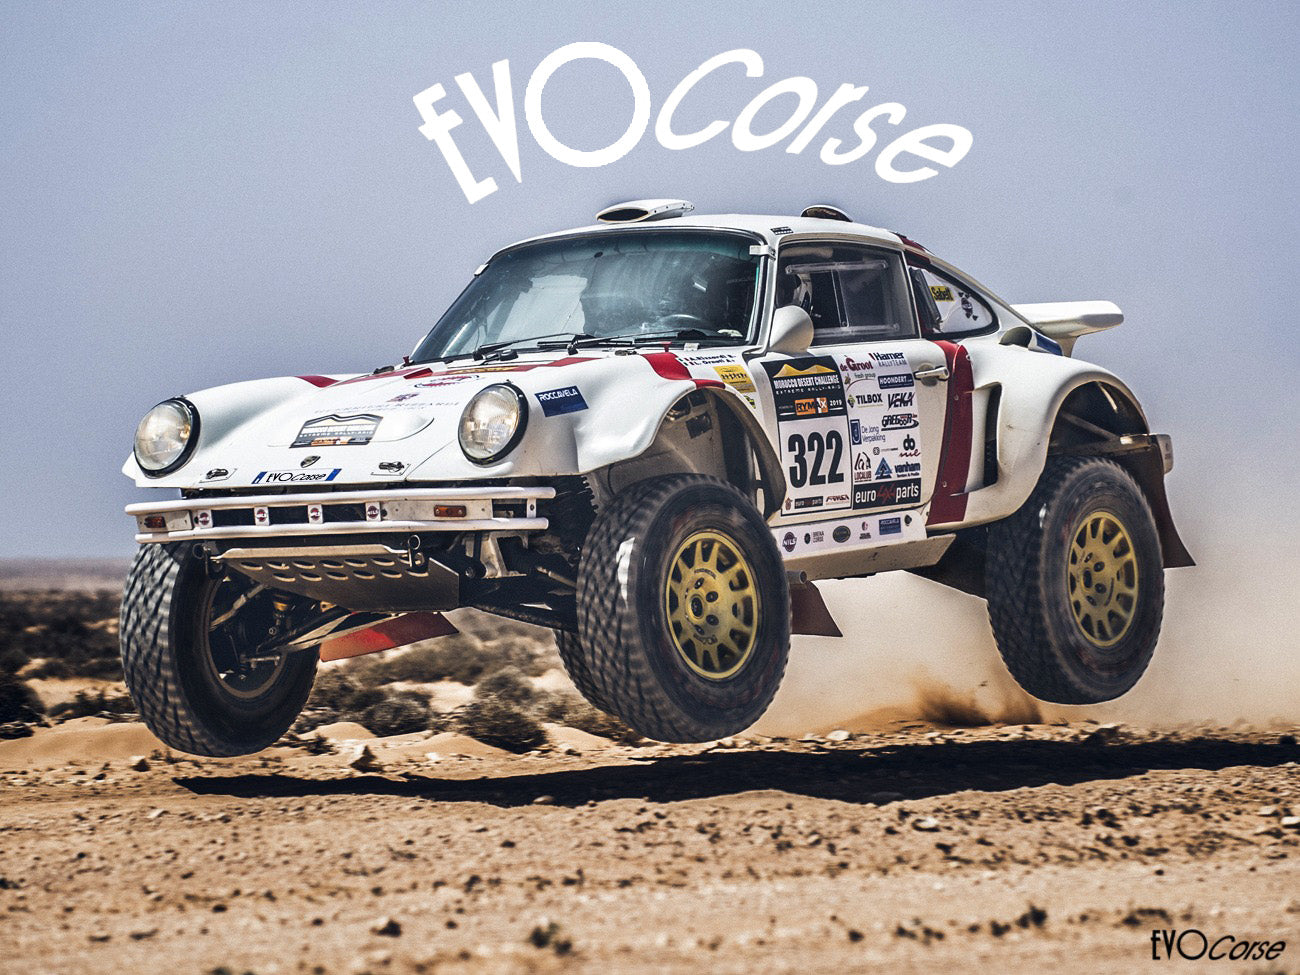 Evo corse australia distributor, Porsche racing.  Dakar super zero for Prado, land cruiser 200 and 300 and 70 series, 78 79 76, 4wd and 4x4 alloy wheels with 1500kg and 2000kg load rating index made in Italy 